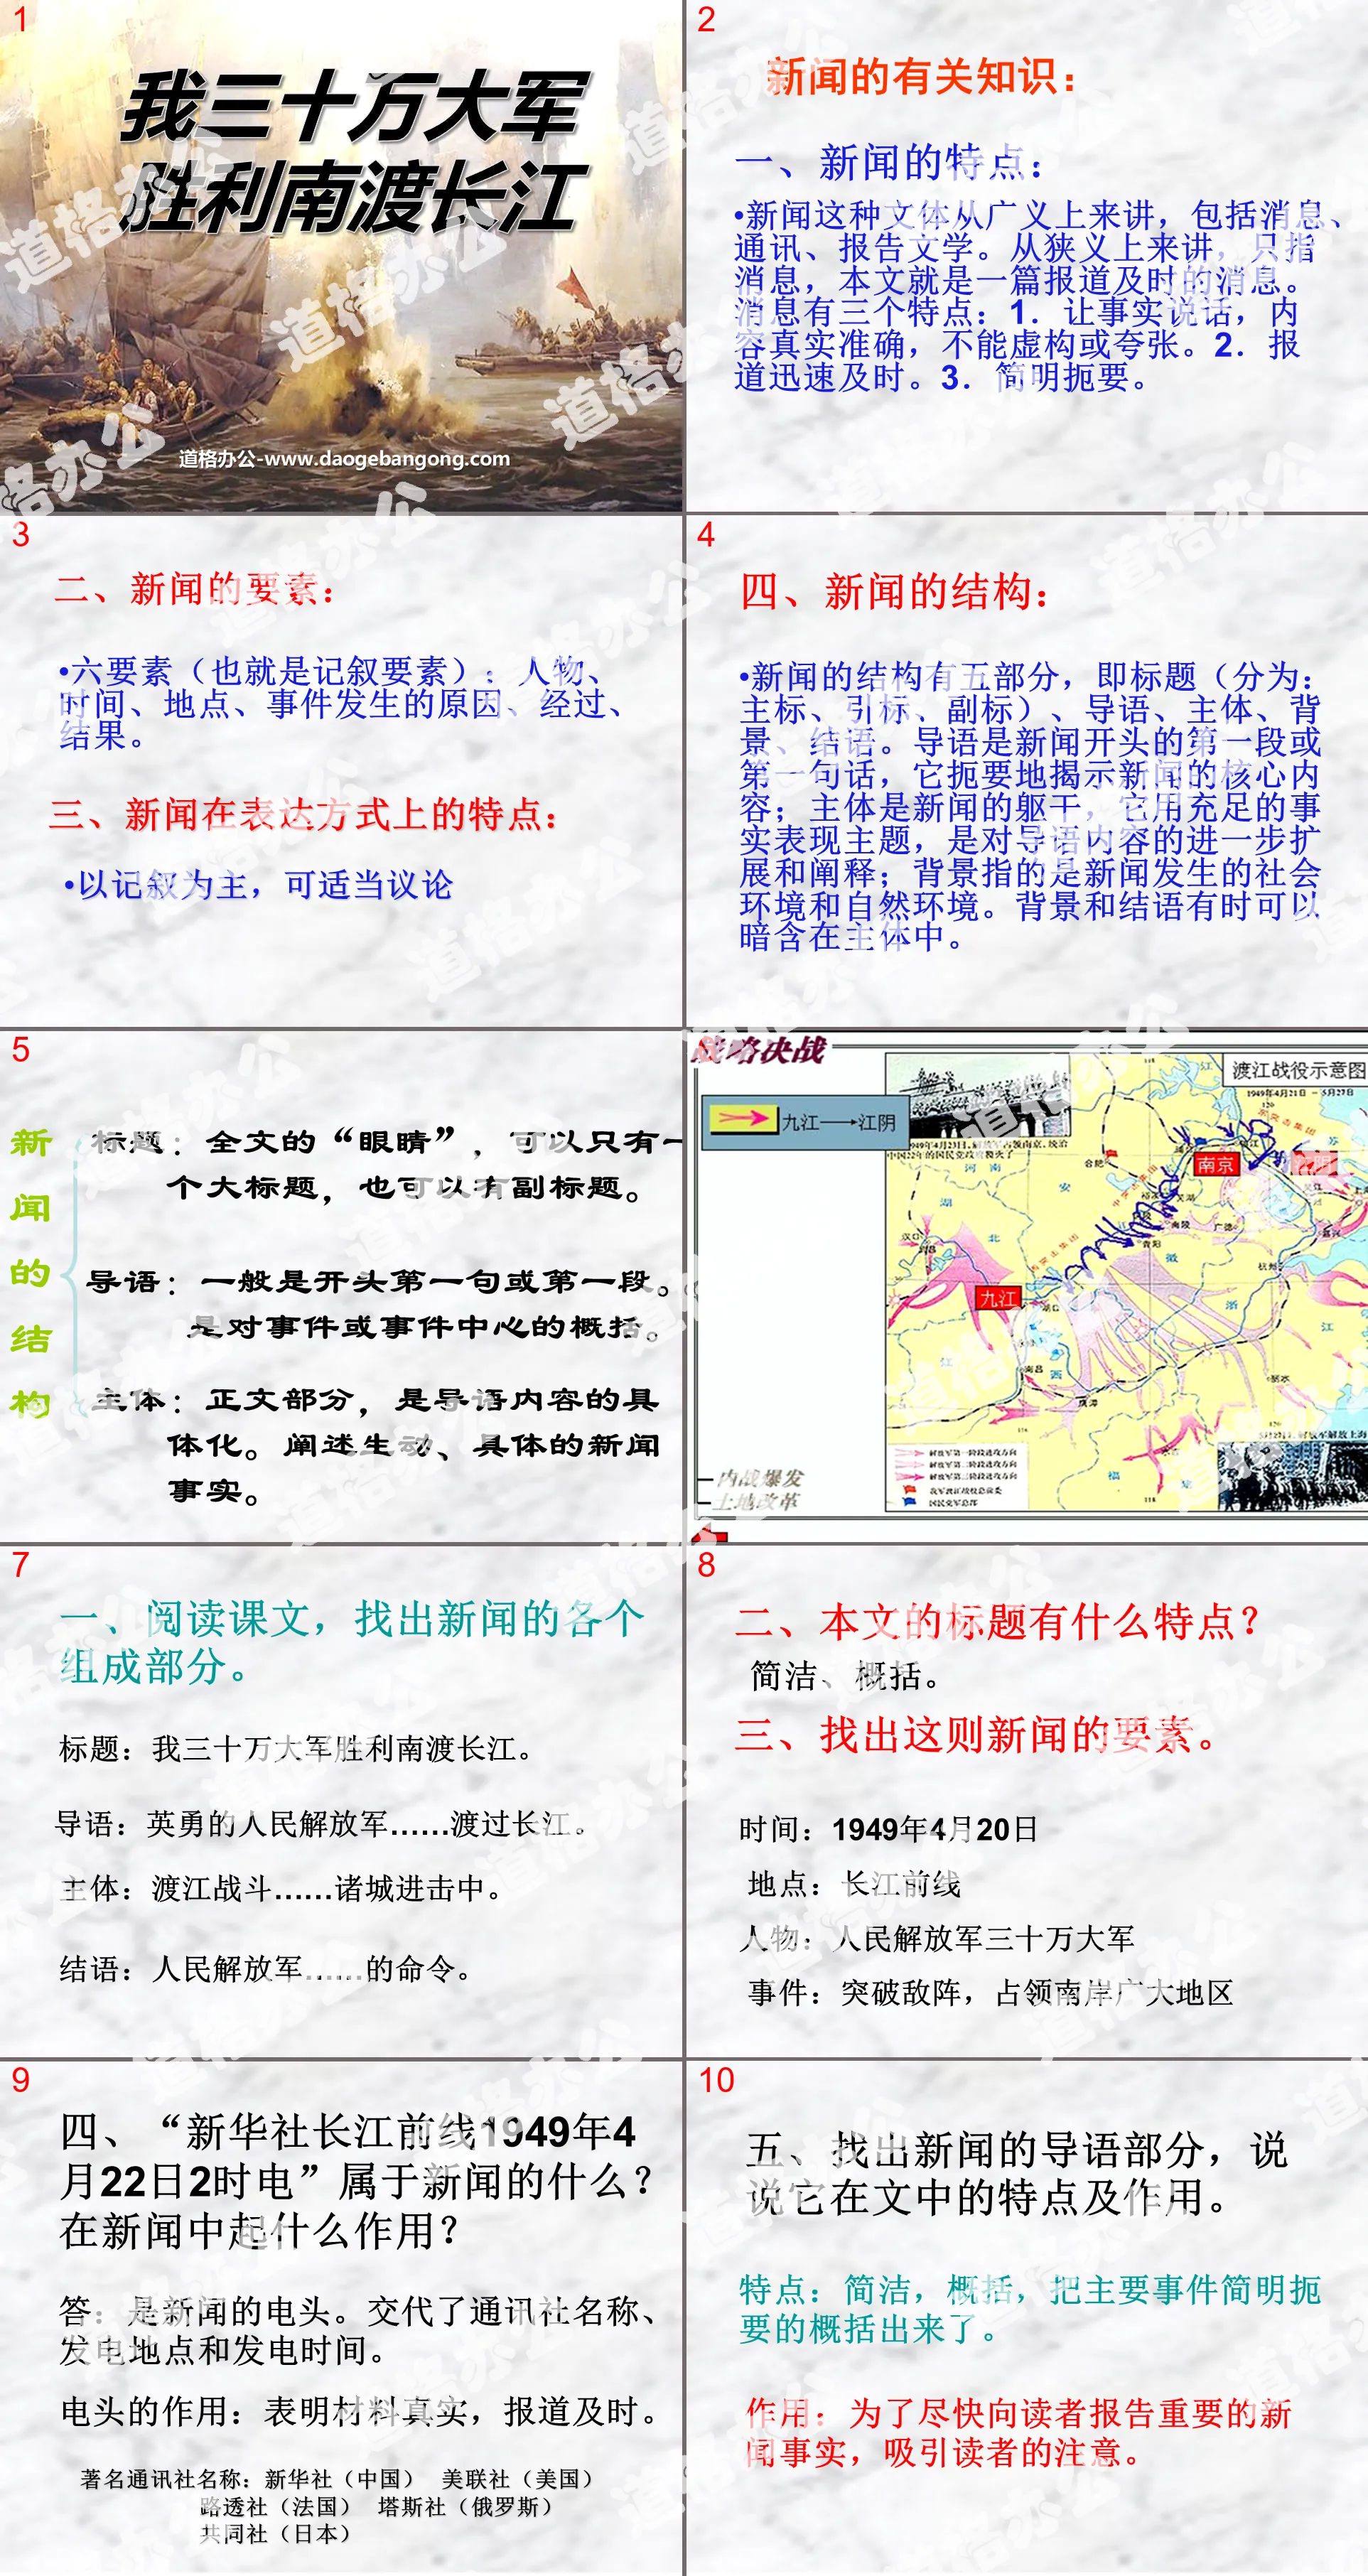 "My 300,000-strong army successfully crossed the Yangtze River south" PPT courseware